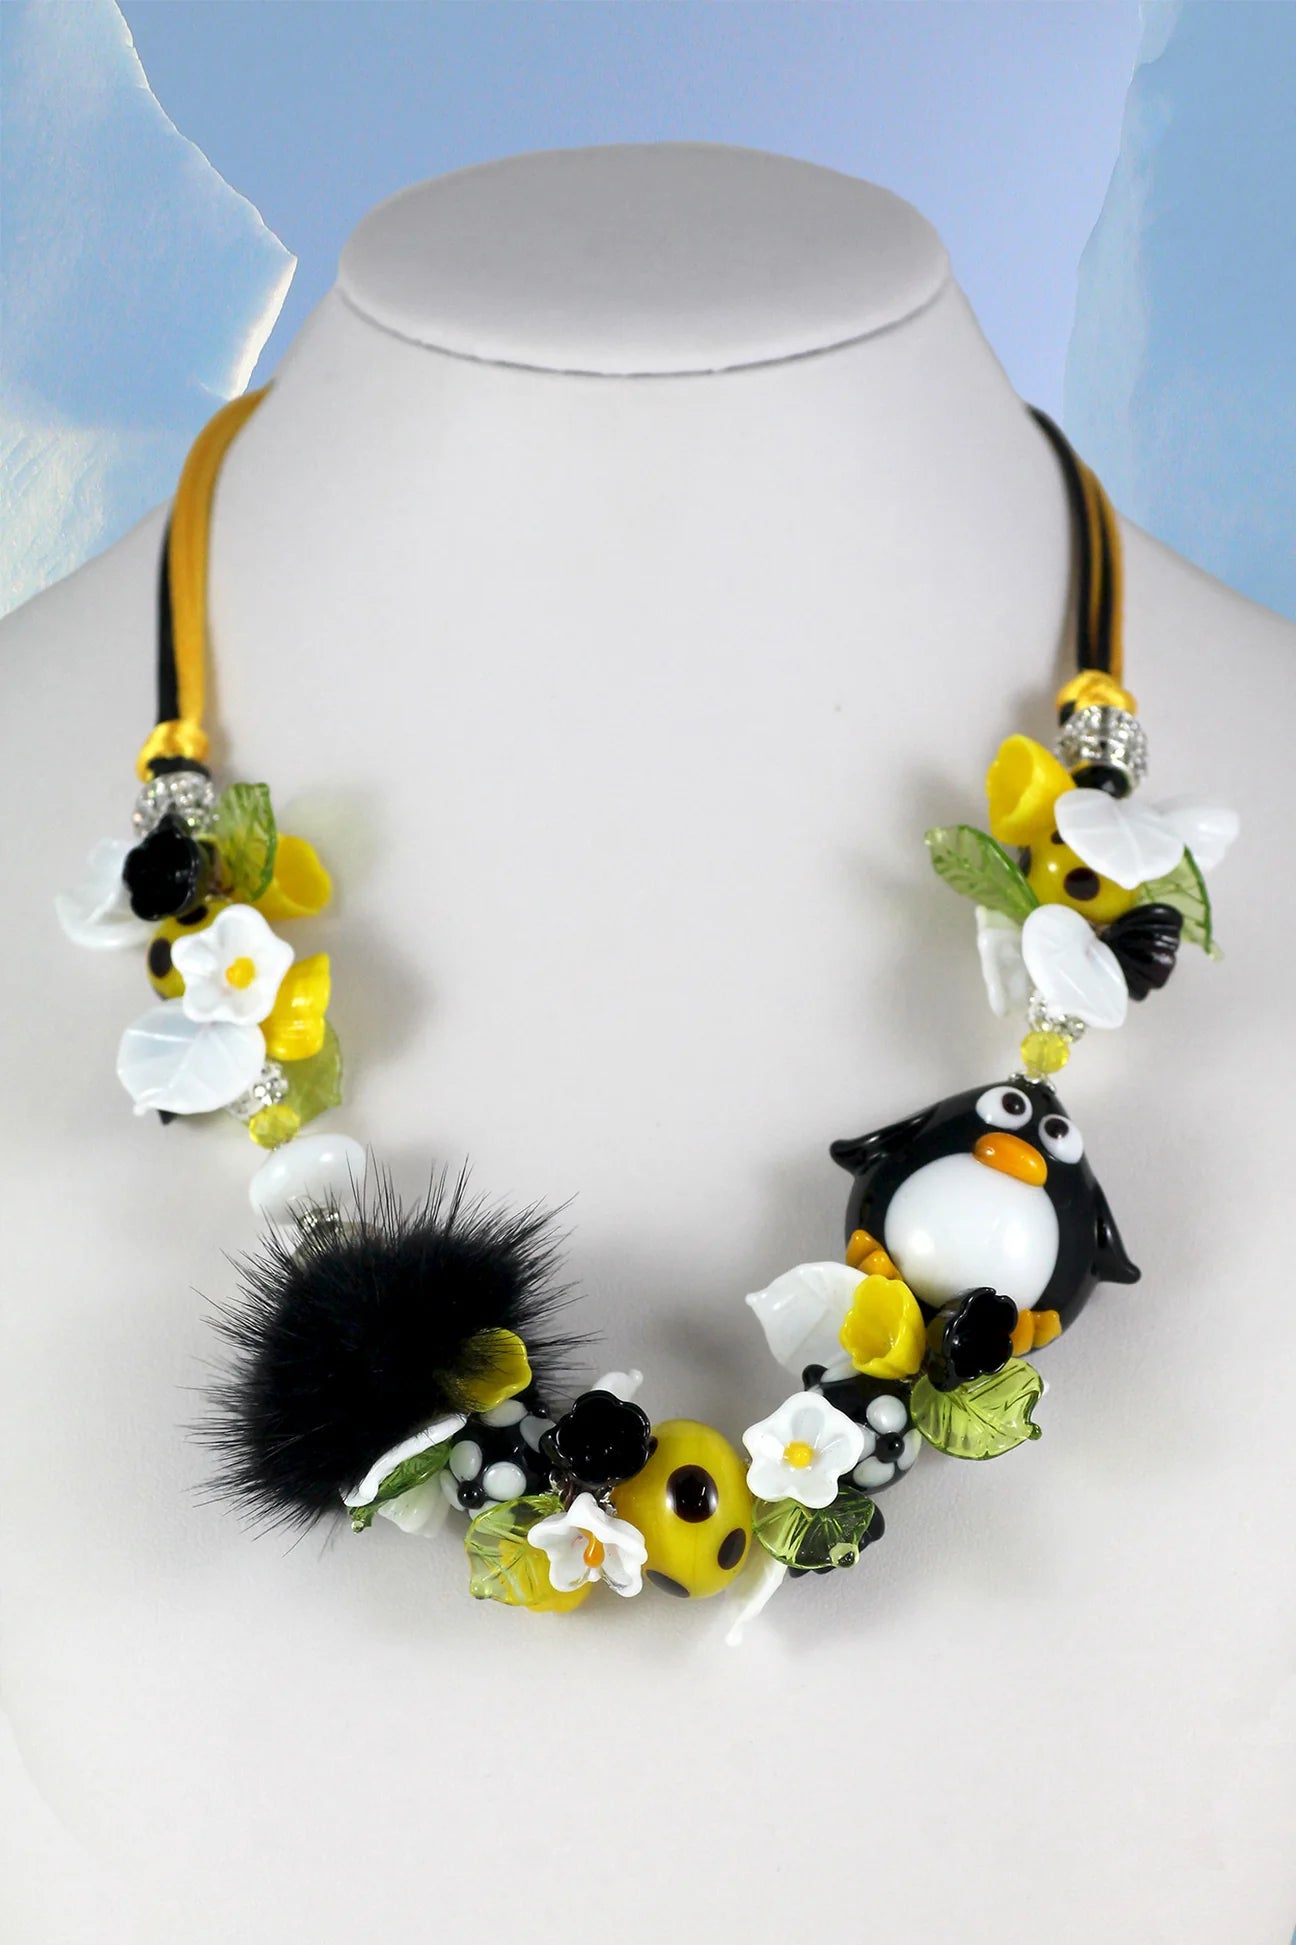 Penguin igloo necklace with flowers